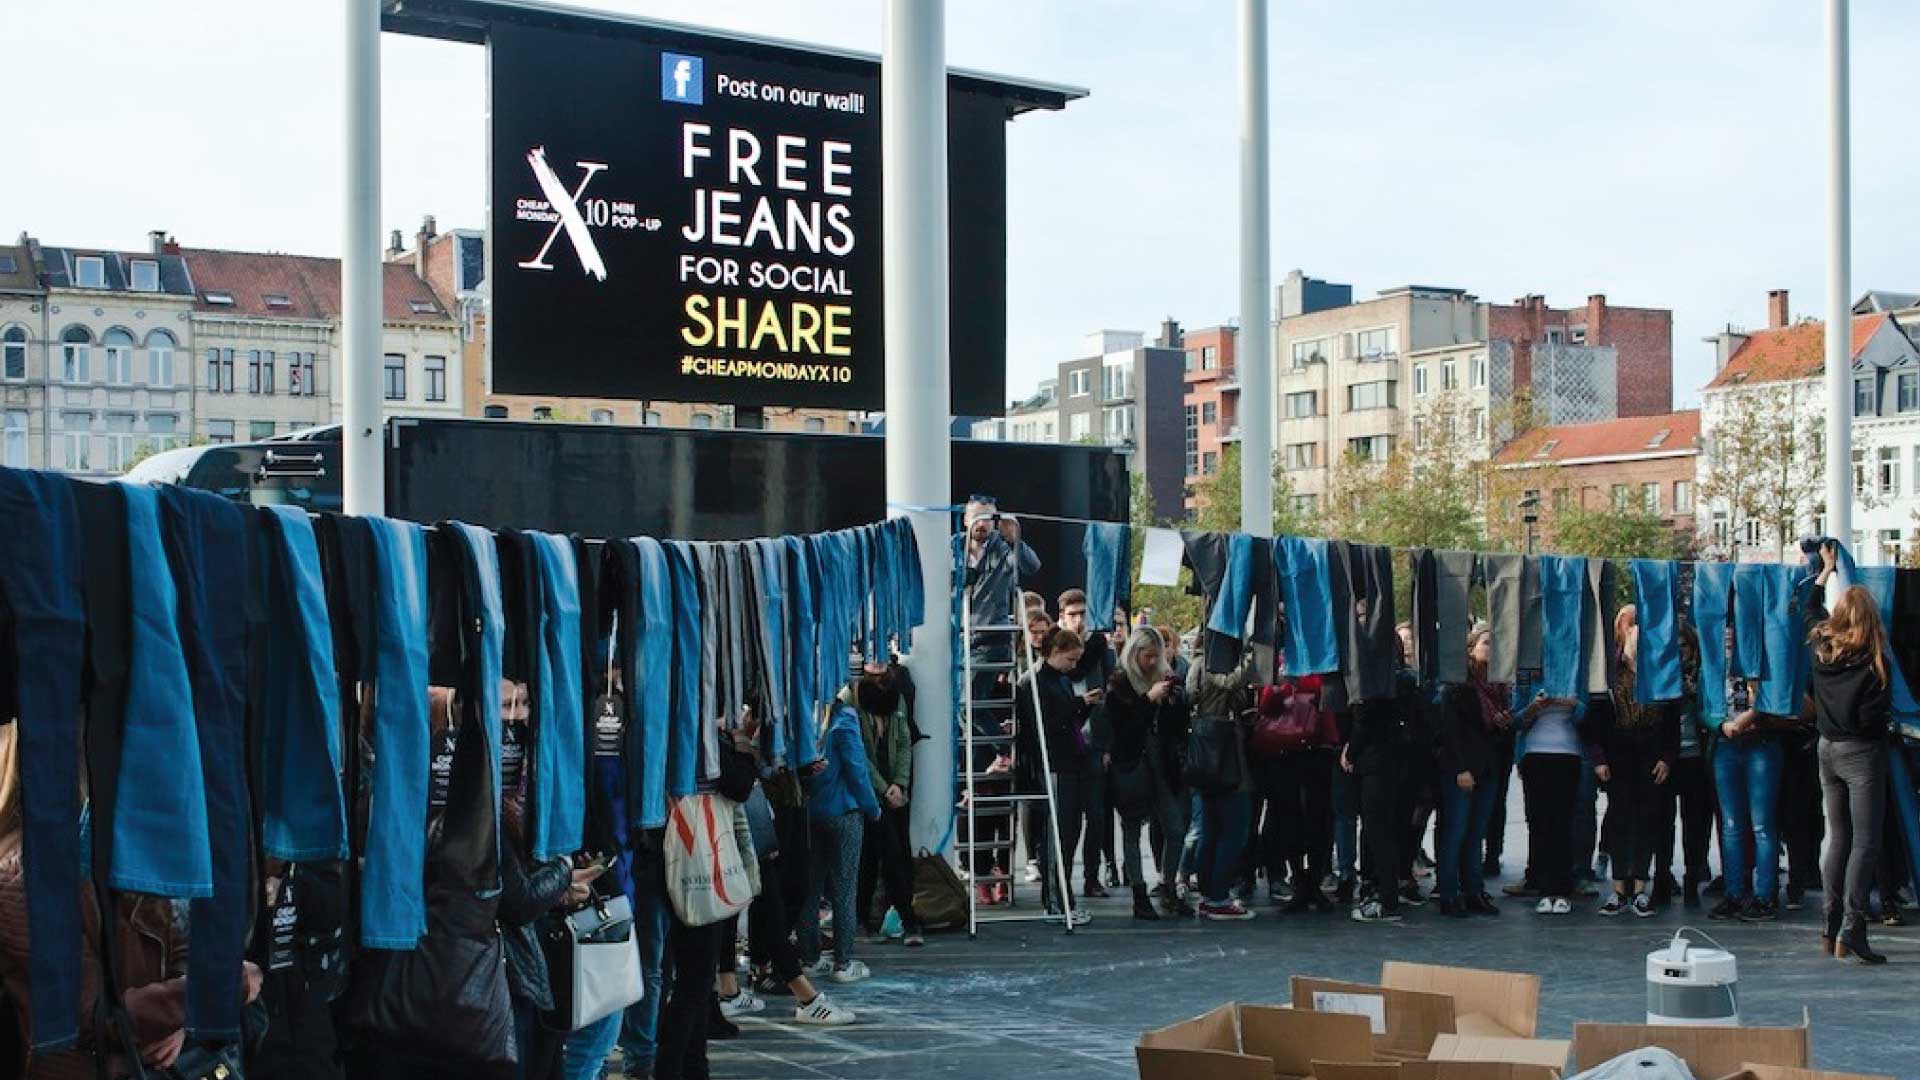 event with jeans hanging on clotheslines